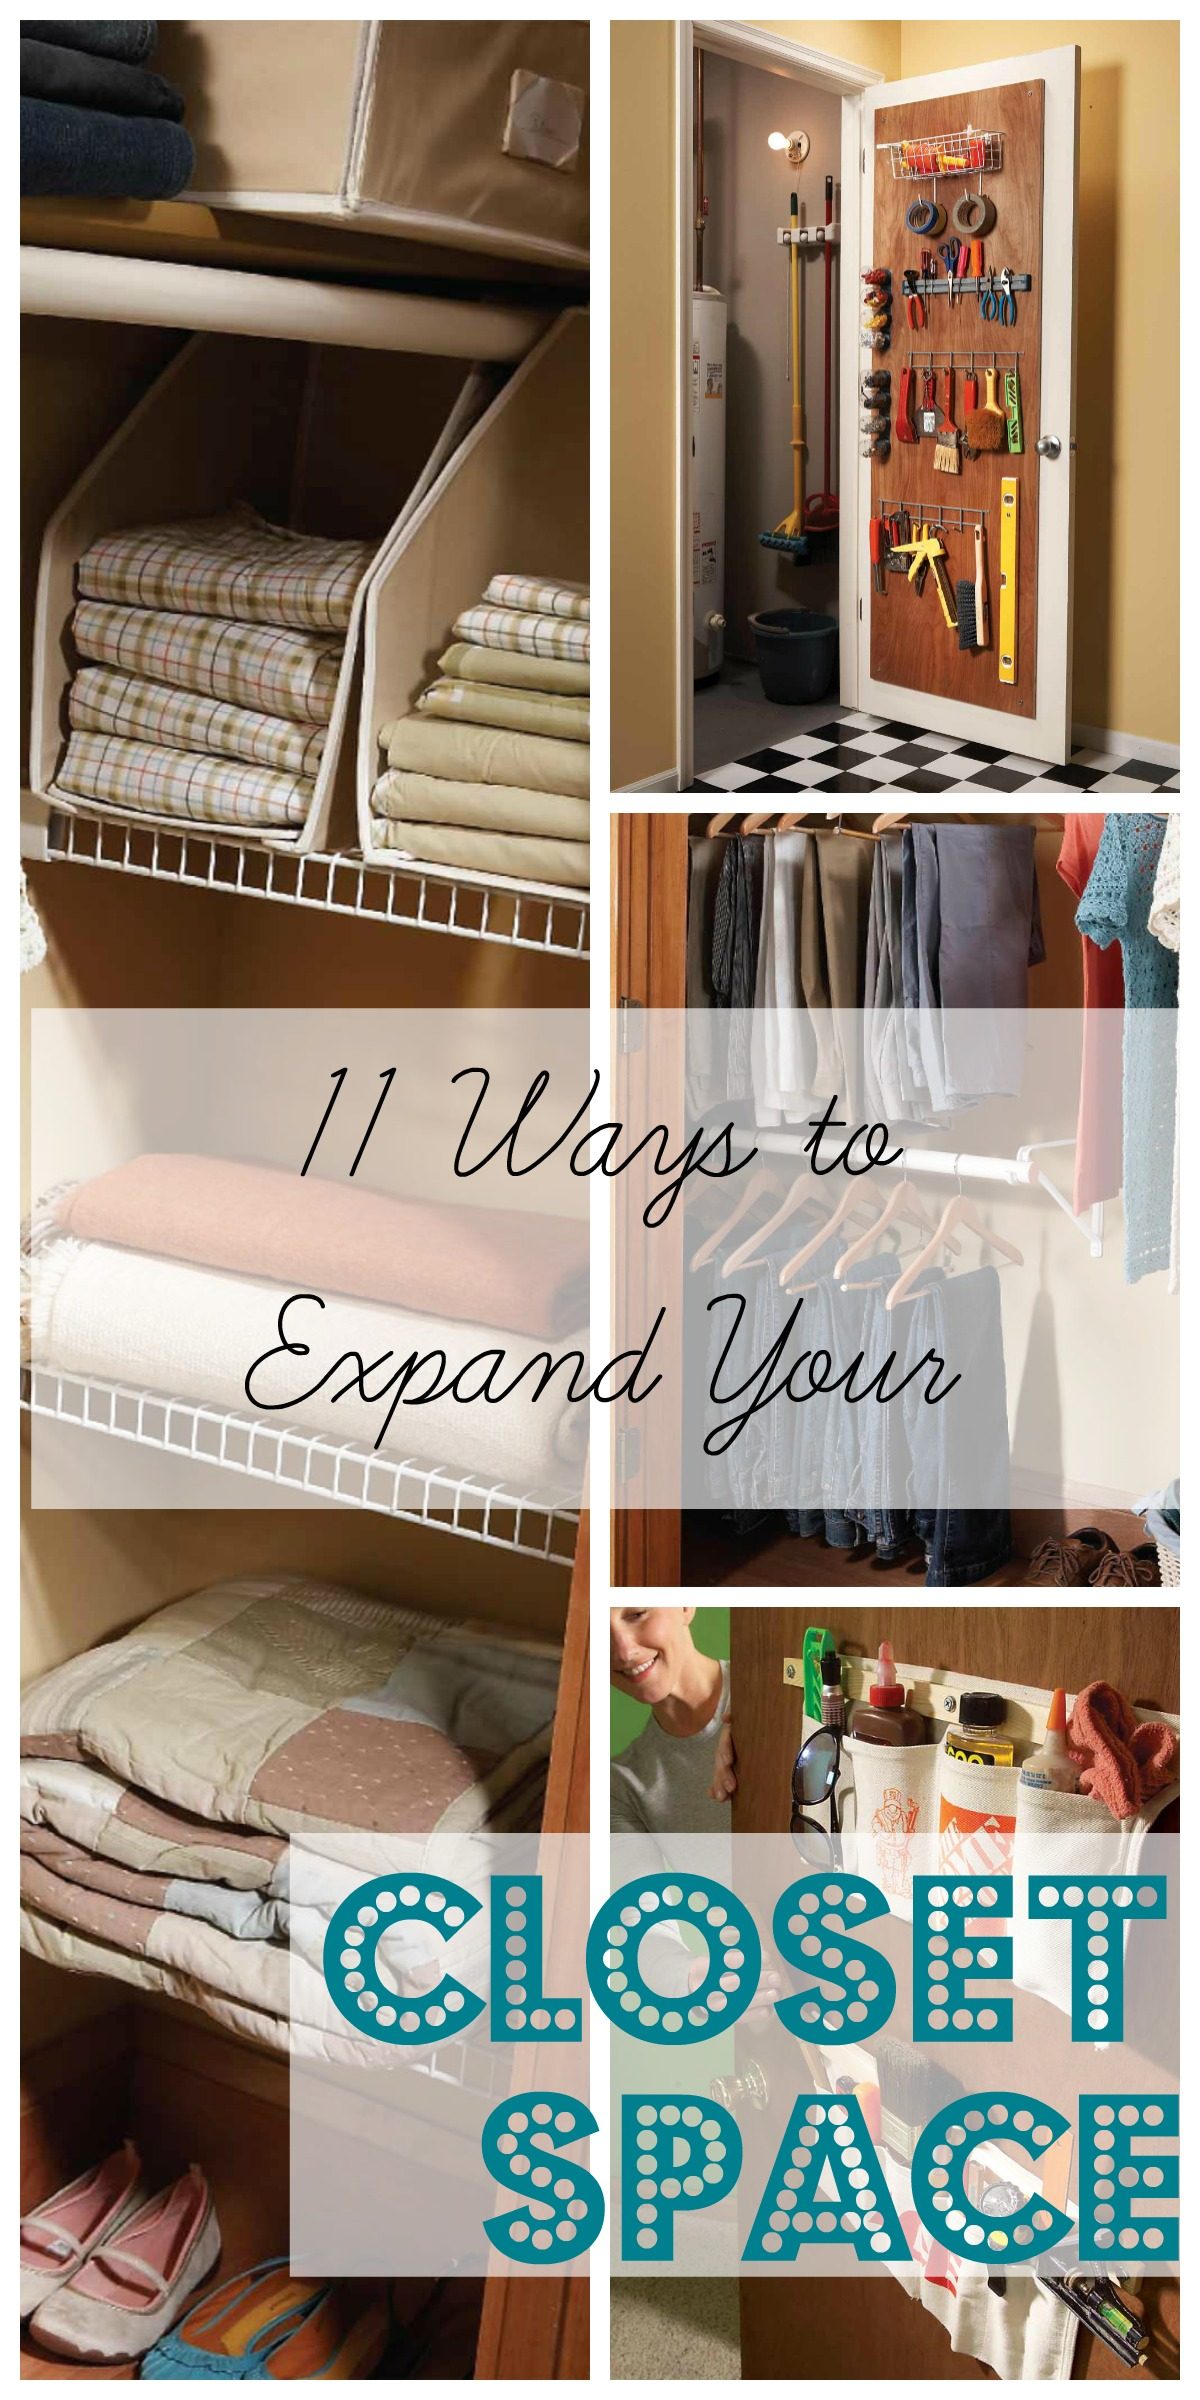 Easy Ways to Expand Your Closet Space | The Family Handyman